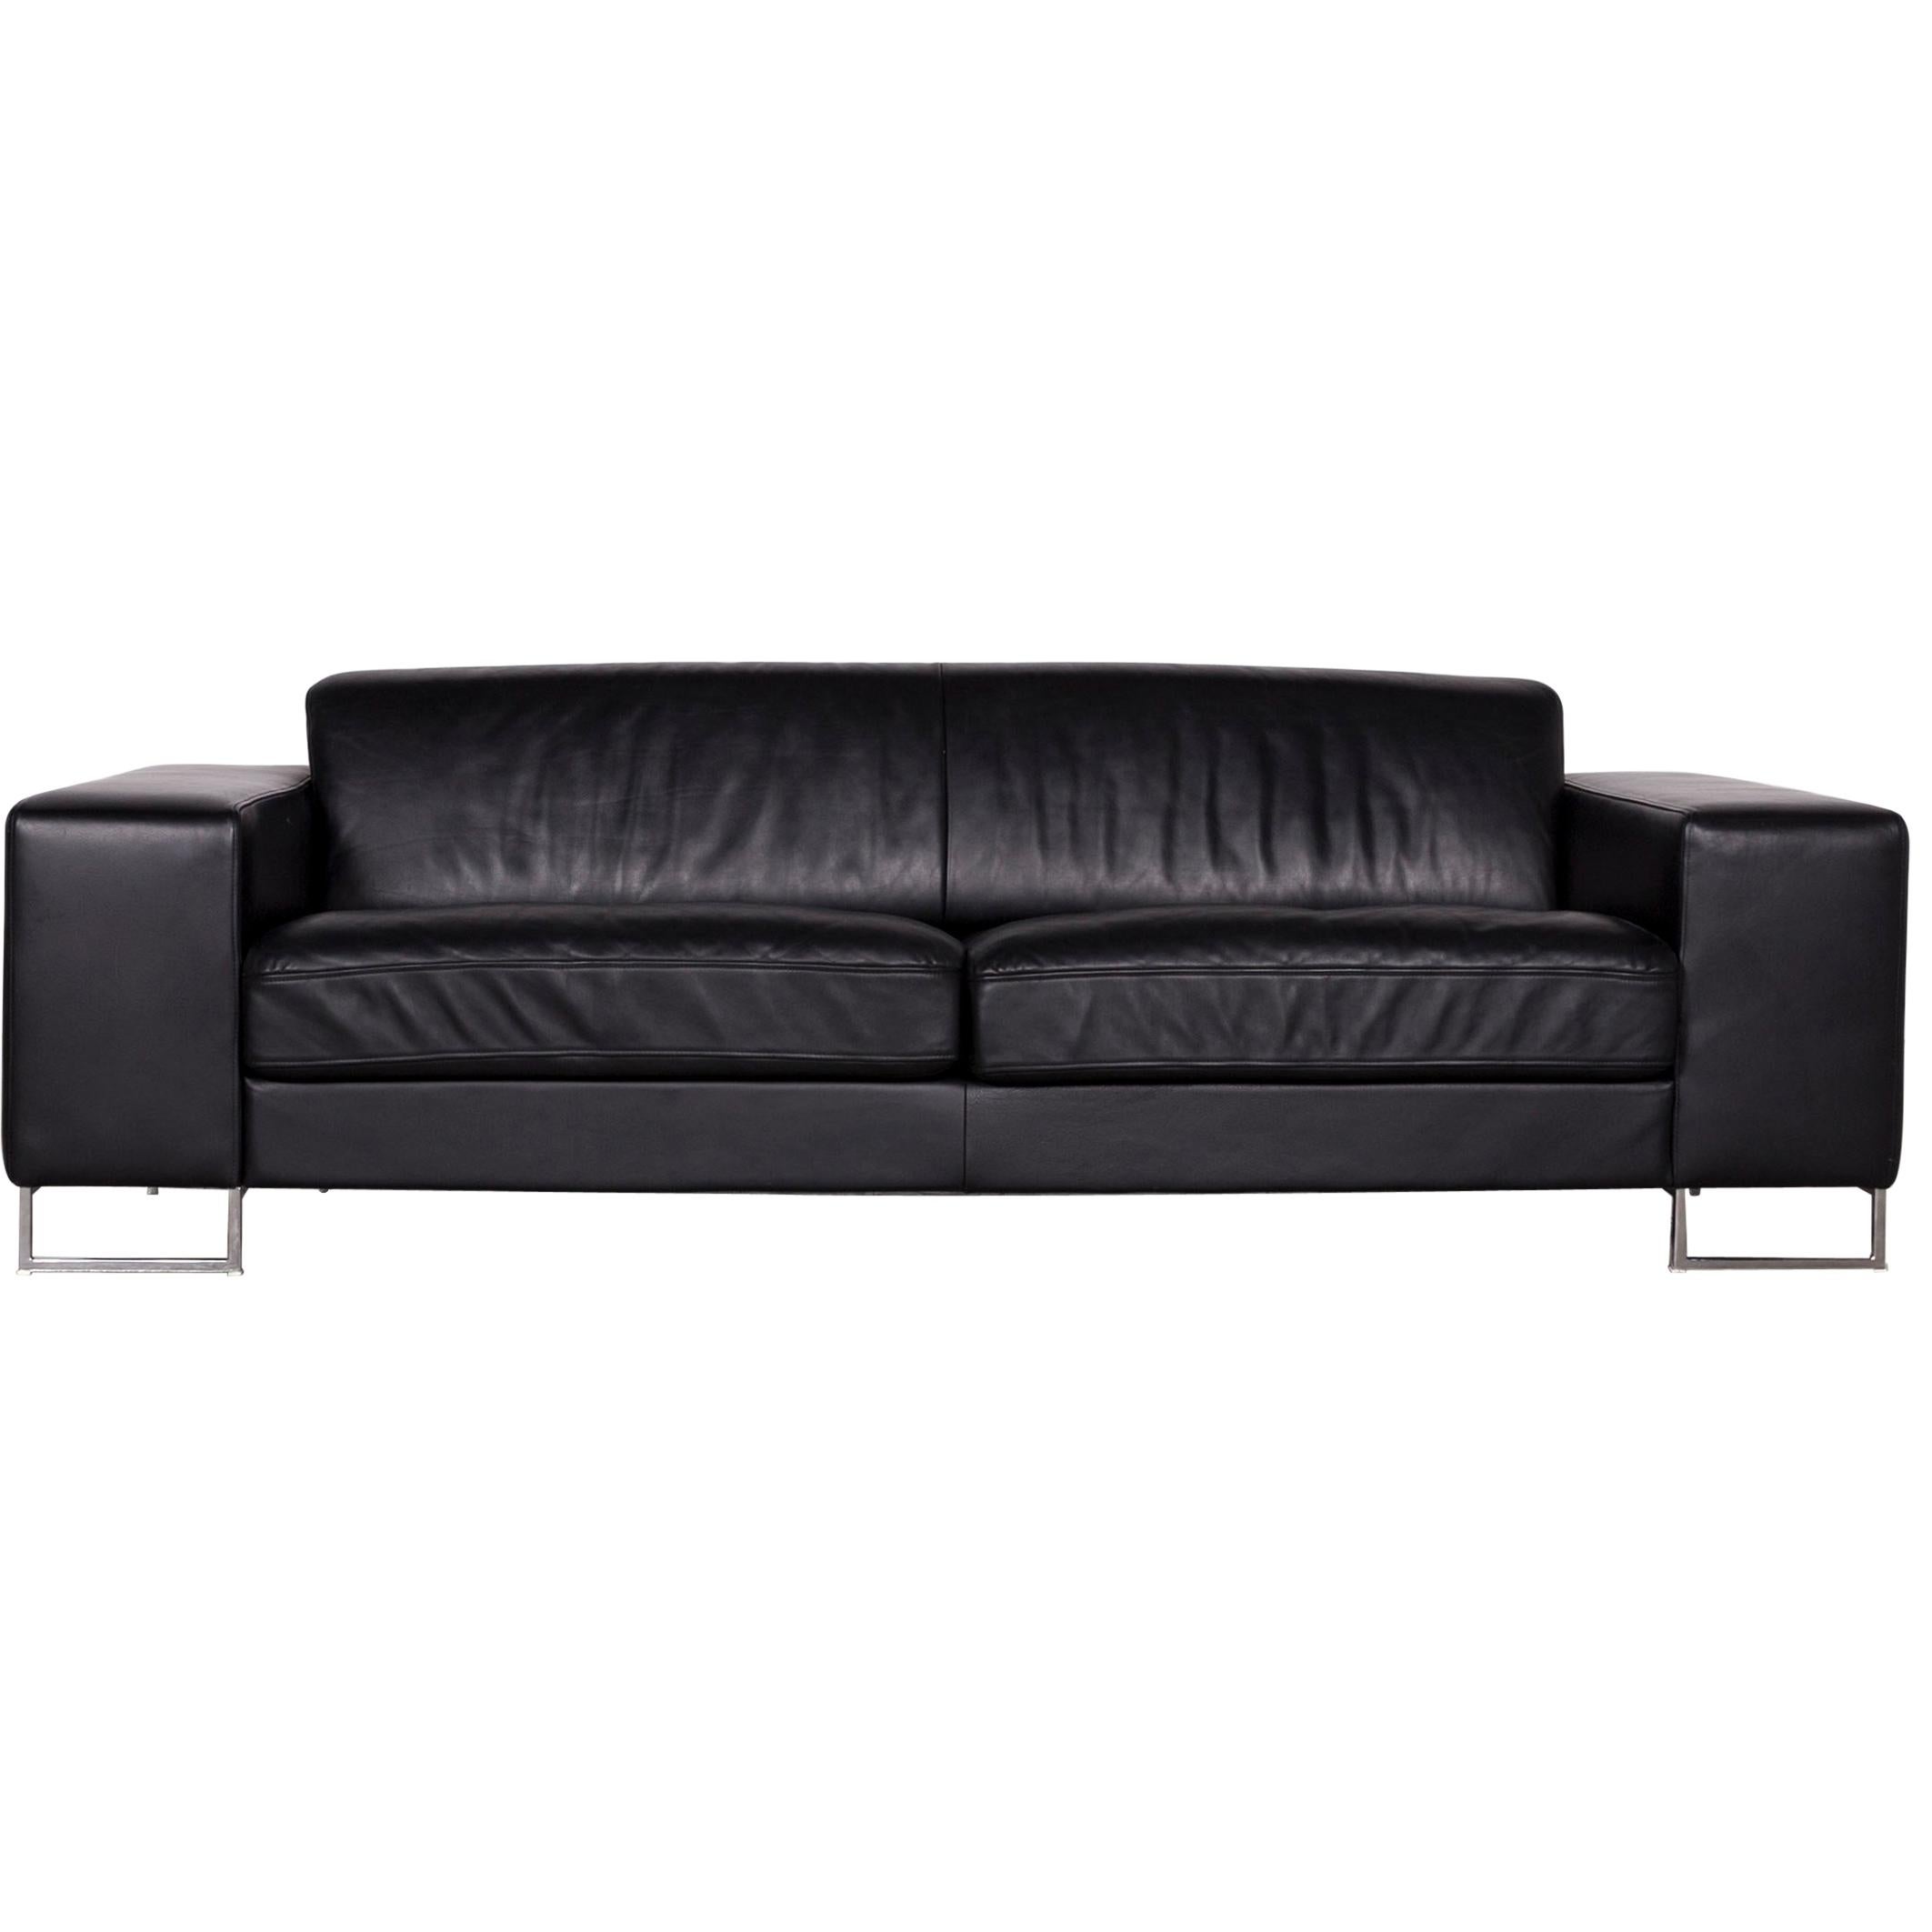 Designer Leather Sofa Black Three-Seat Couch For Sale